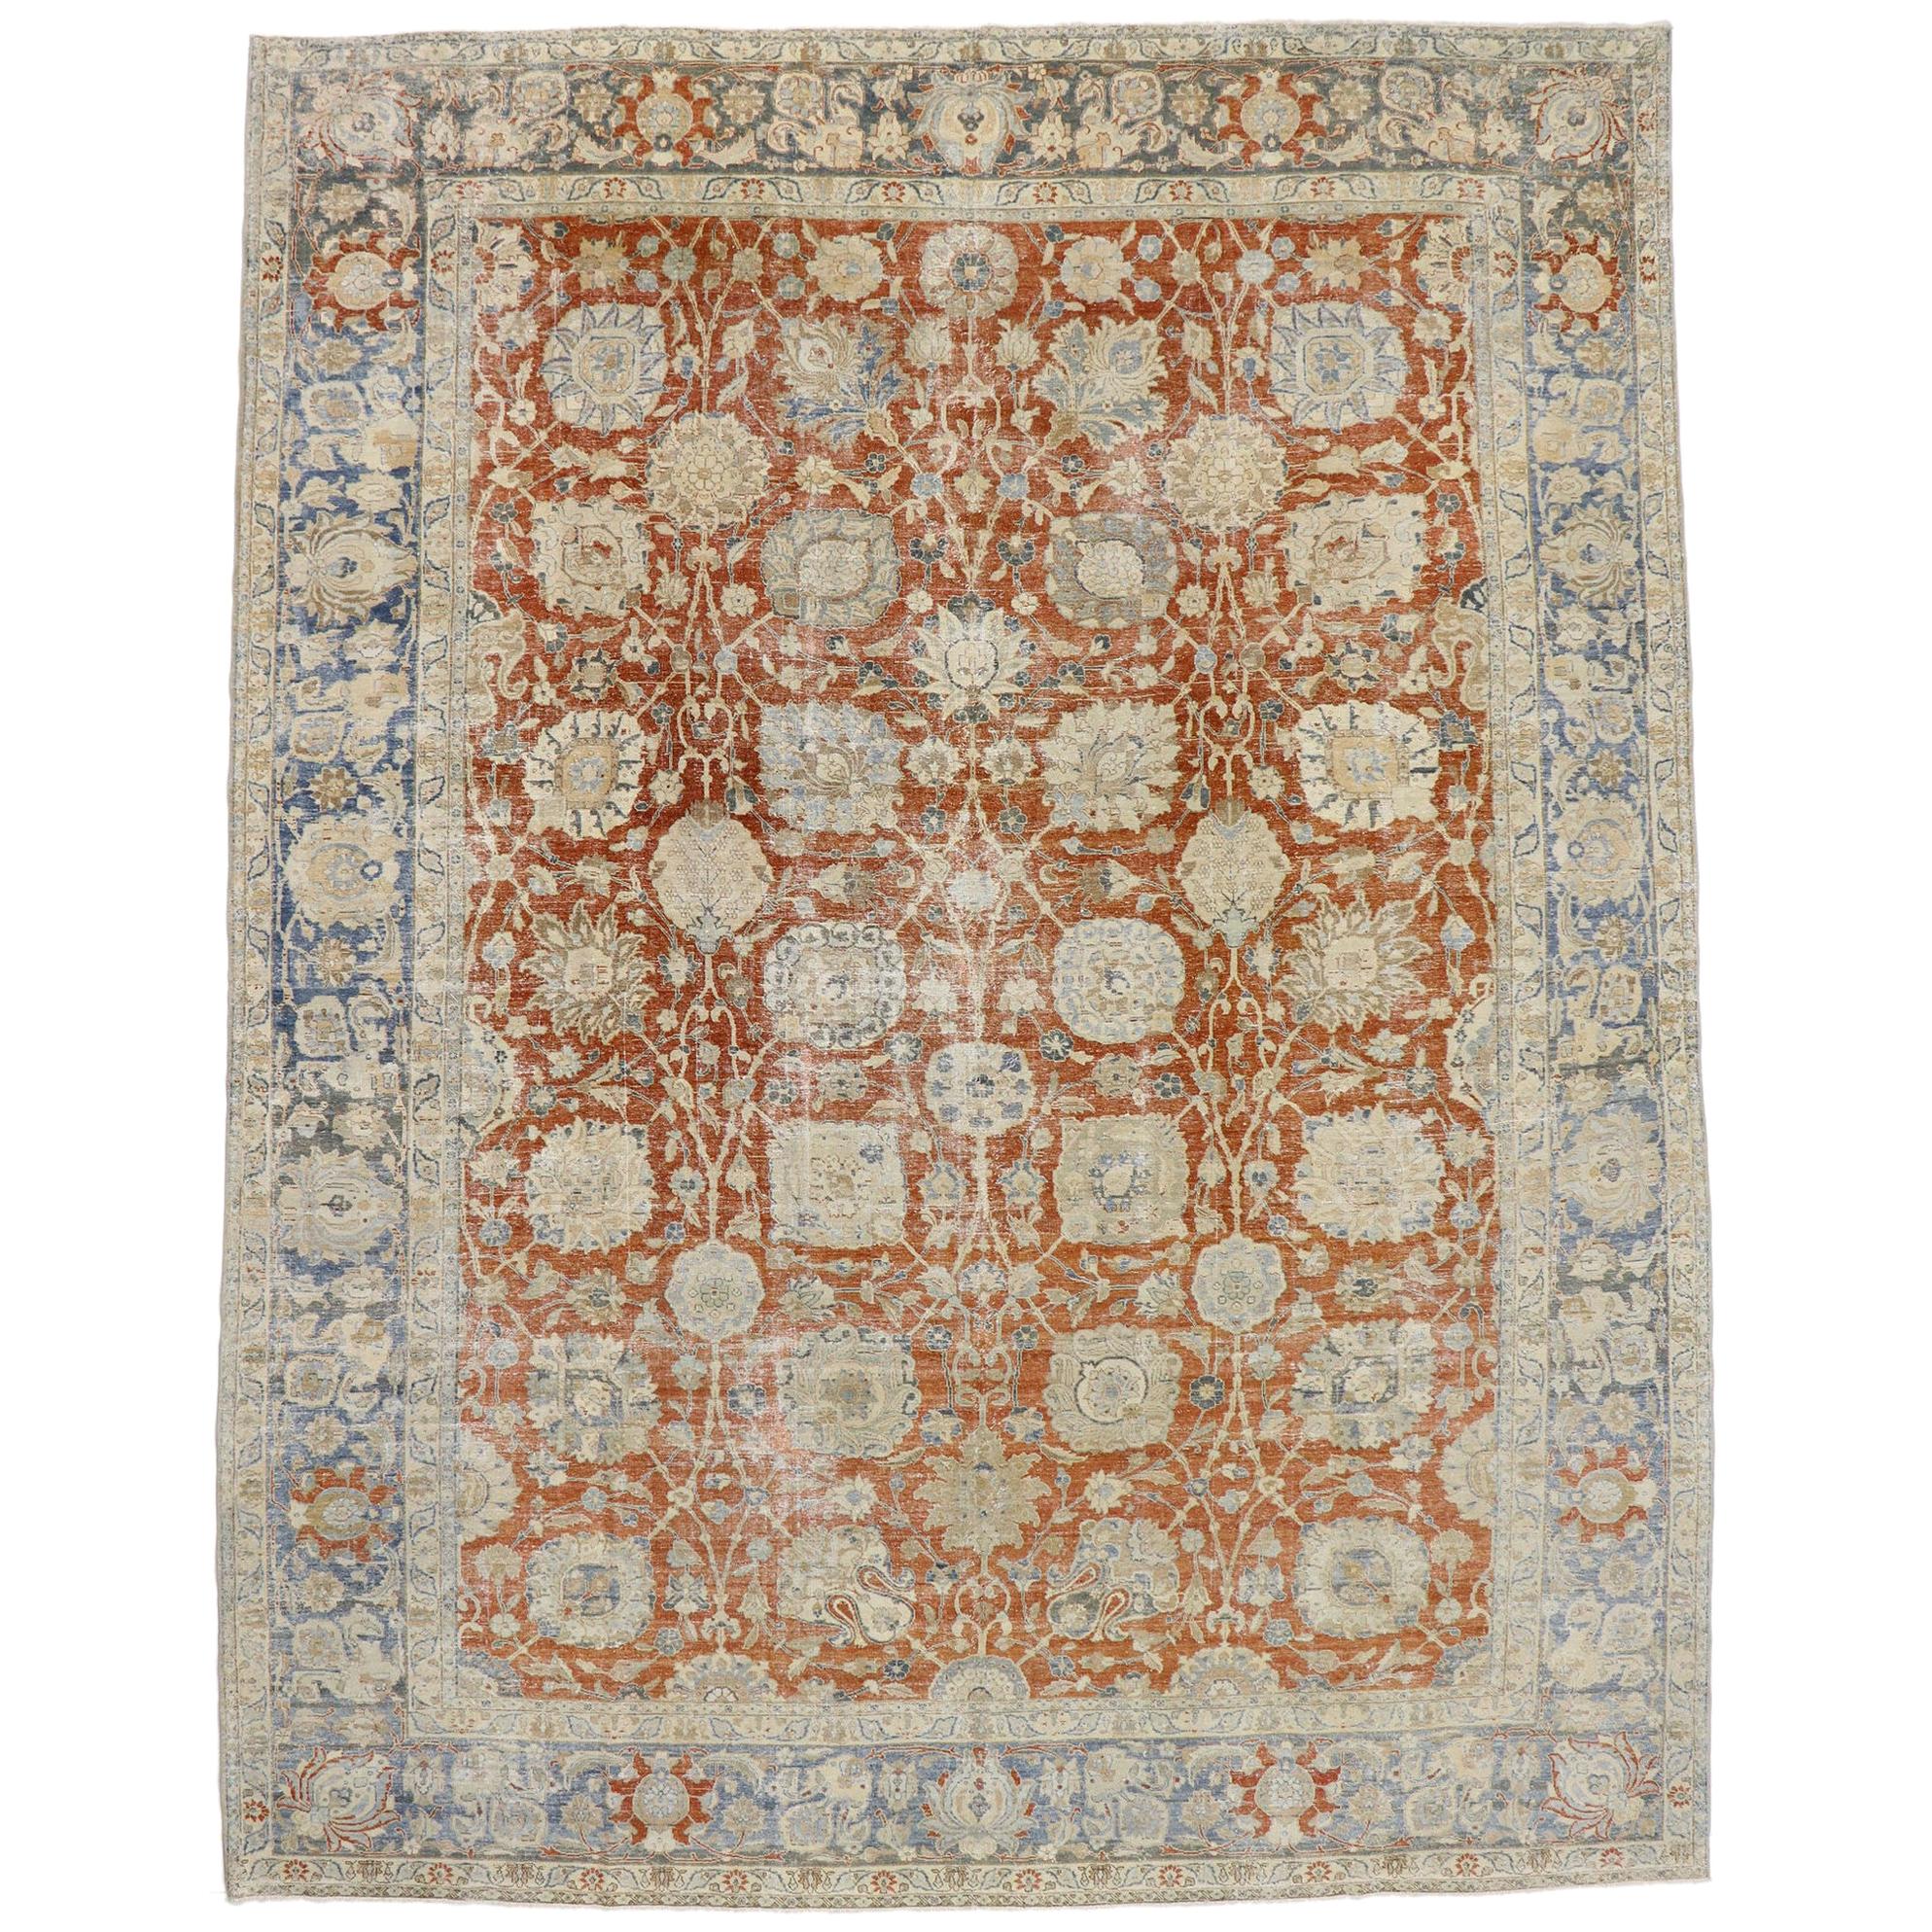 Distressed Antique Persian Tabriz Rug with Rustic Colonial Style